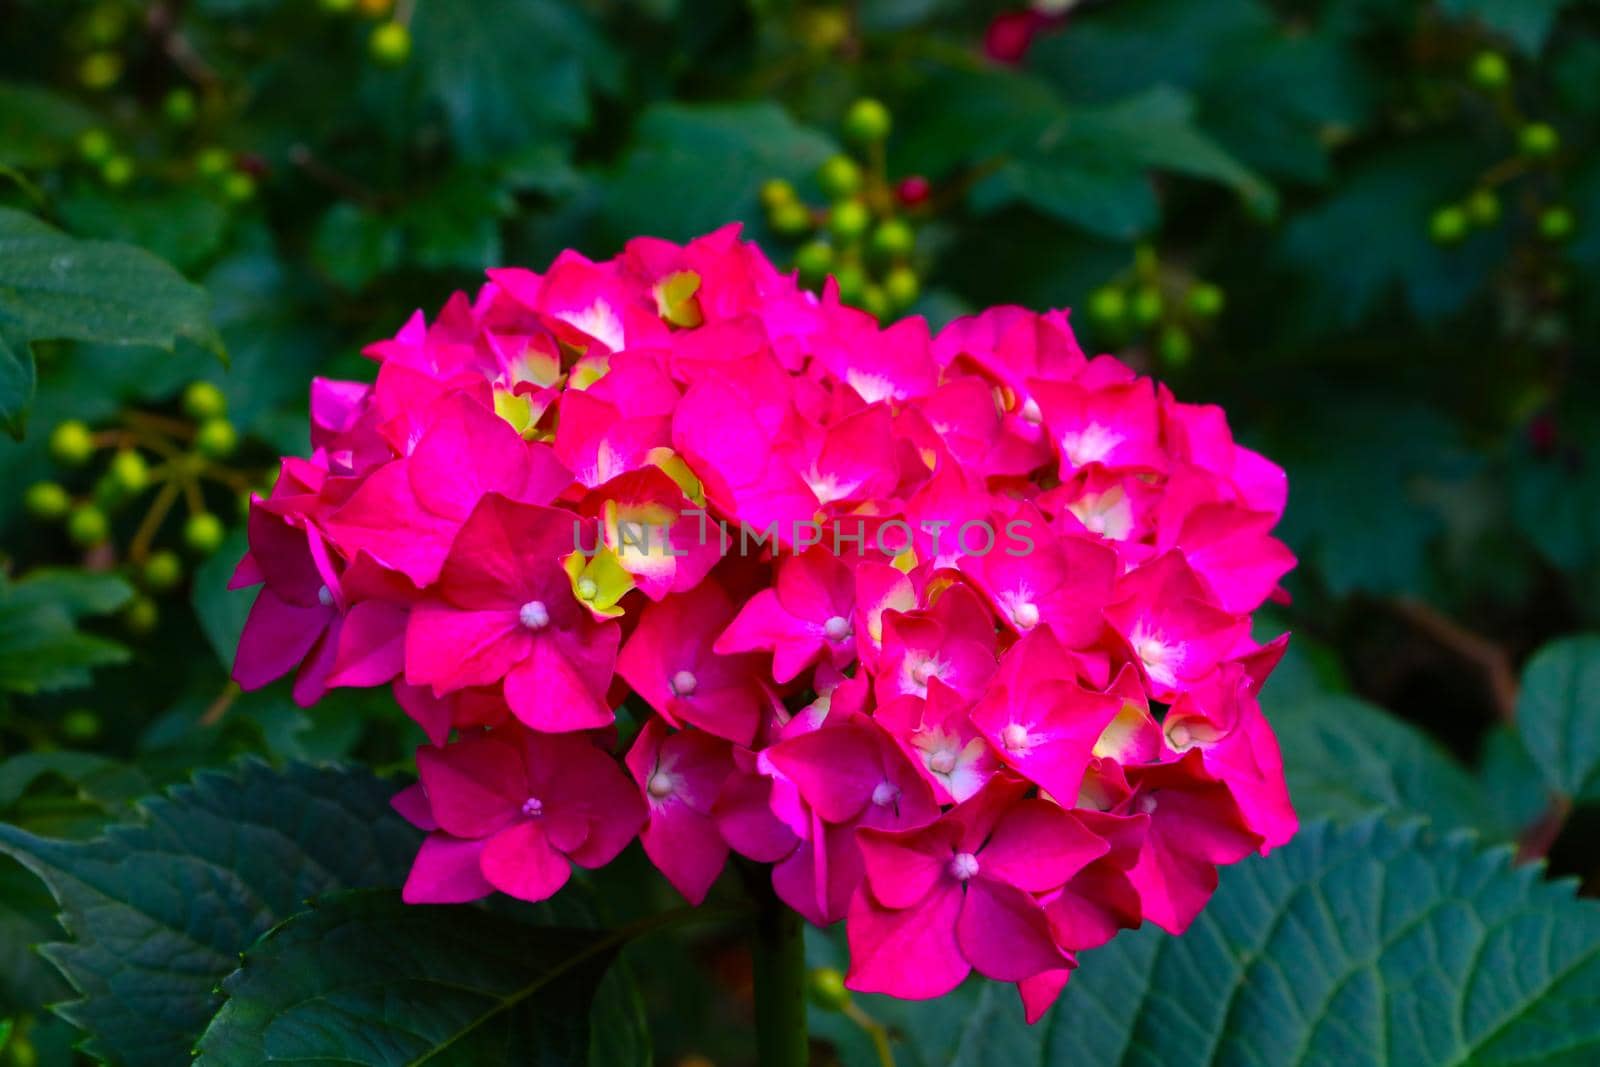 A bright flowering branch of hydrangeas in the garden in the spring. by kip02kas